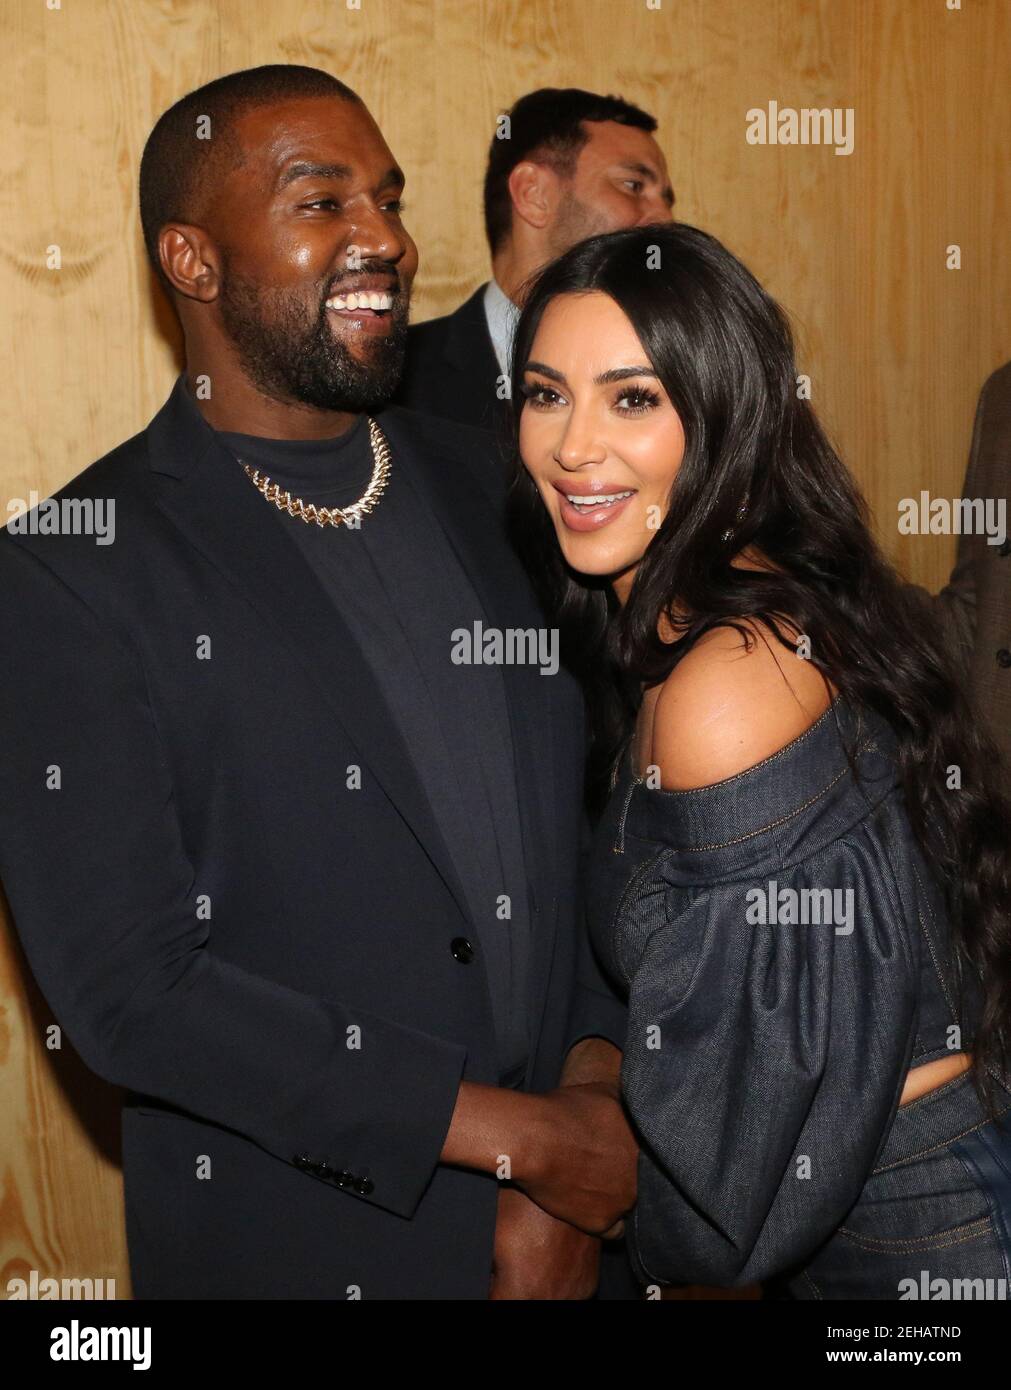 FILE: Kim Kardashian & Kanye West File for Divorce. New York, NY, USA. 6th Nov, 2019. Kanye West & Kim Kardashian West attend the Kanye West 'Follow God' music video presentation at the Burberry Store, November 6, 2019 in New York City. Photo Credit: Walik Goshorn/Mediapunch/Alamy Live News Stock Photo